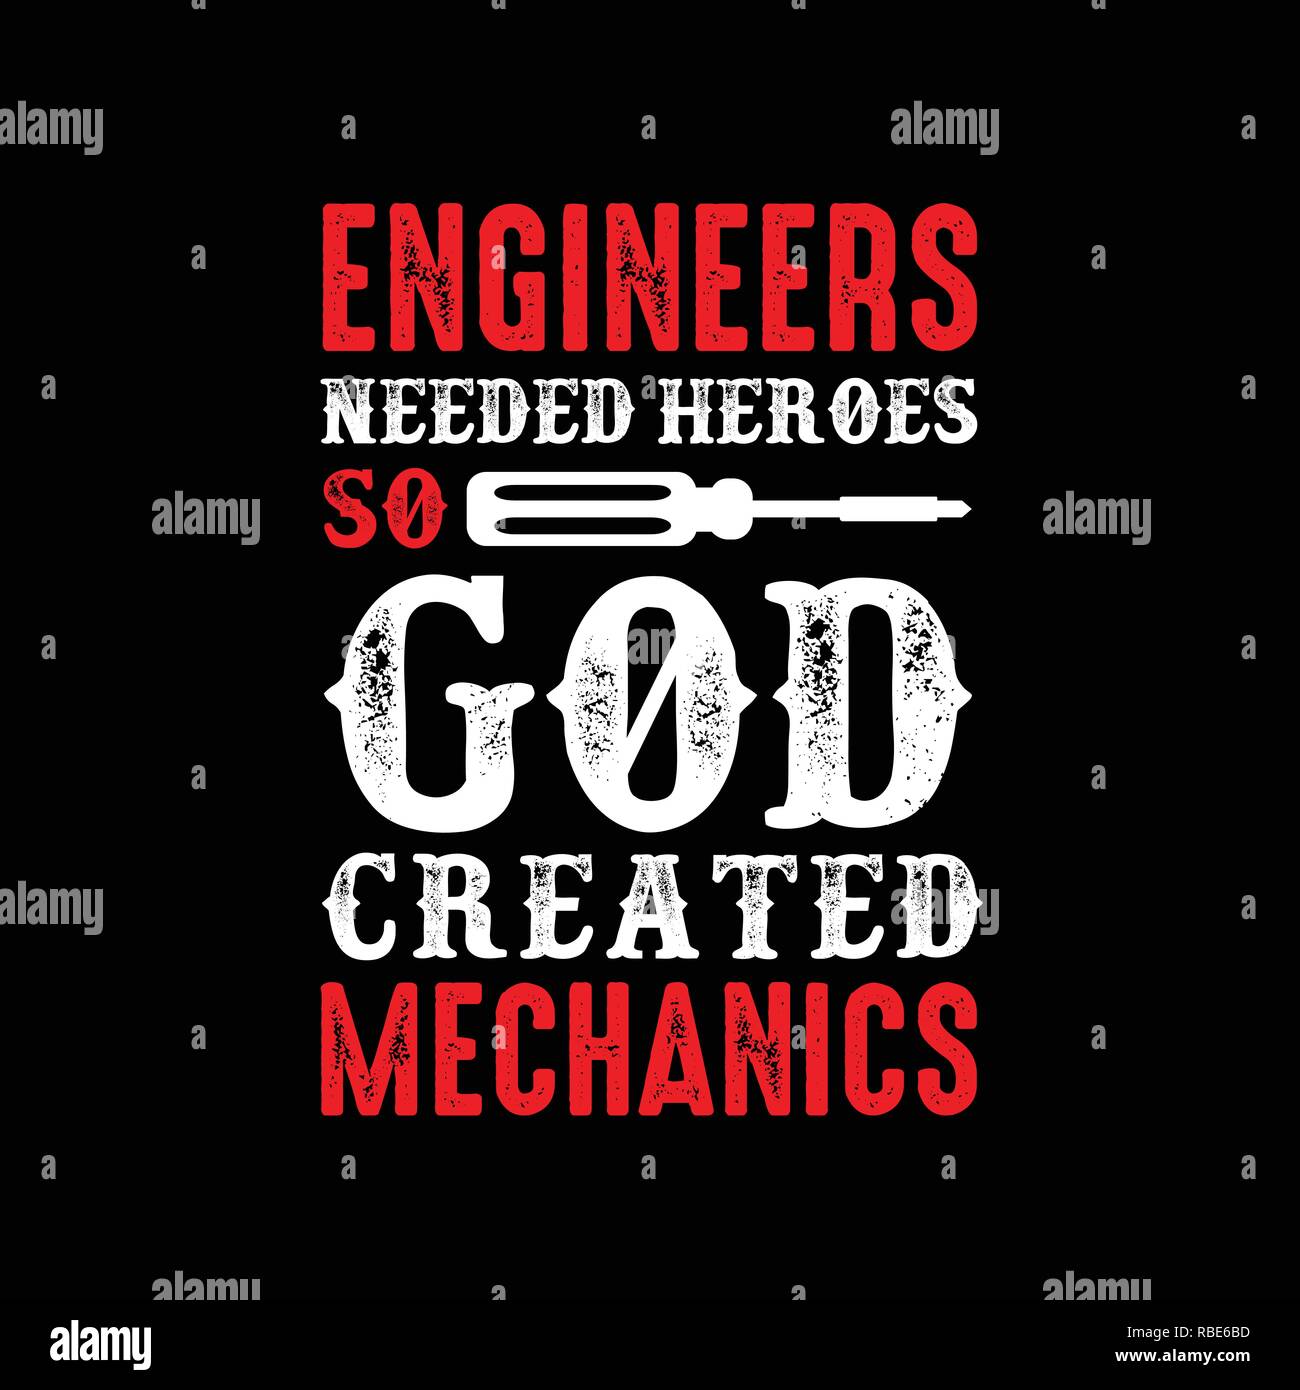 Mechanic Quote and saying. Engineers needed heroes so god created Stock Vector